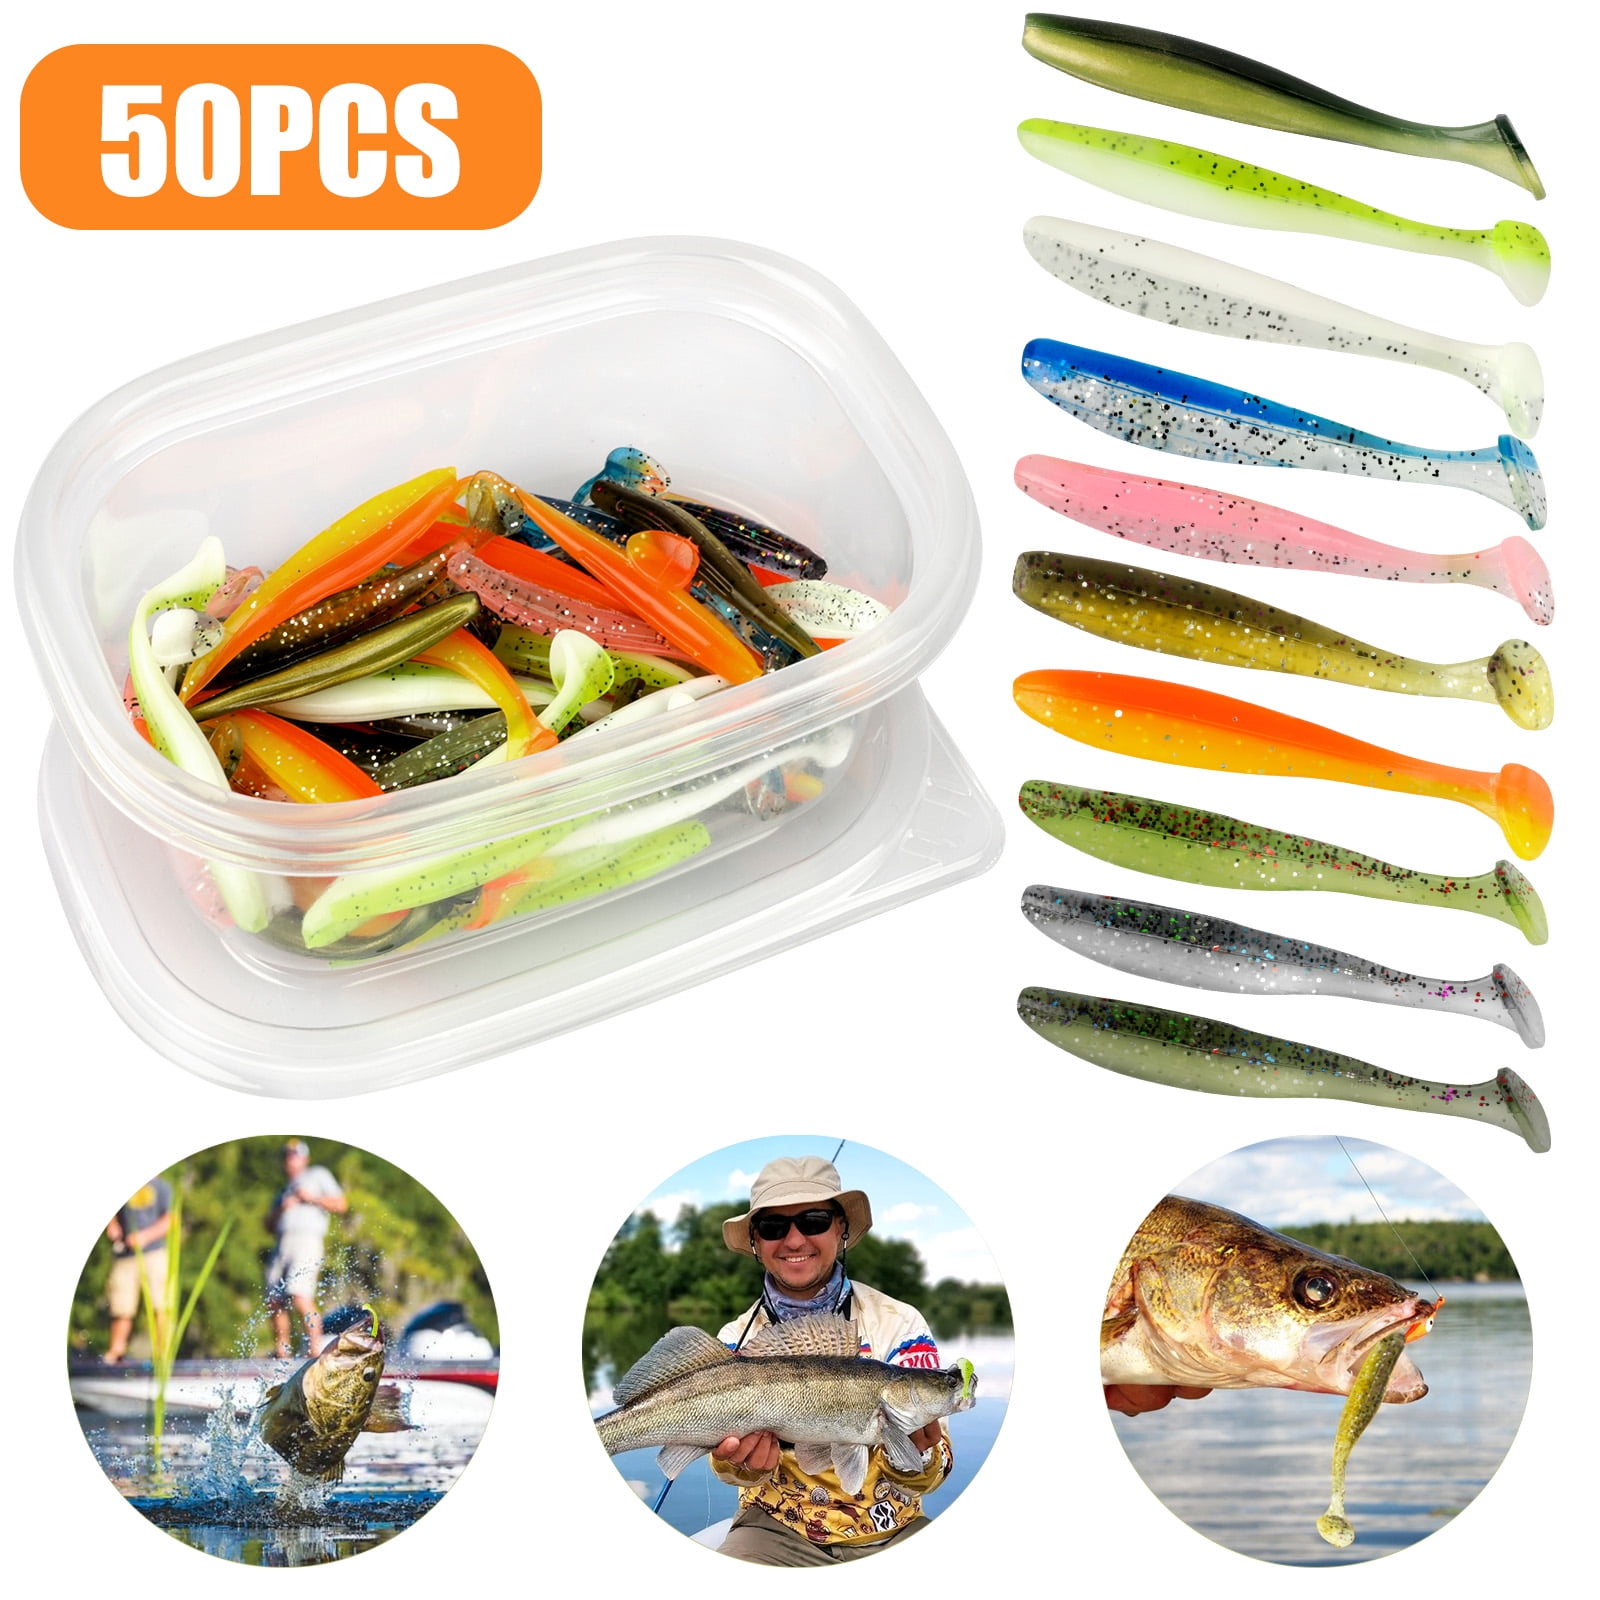 50pcs Portable Soft Fishing Lures Curly Twin Tail Grub Worm Baits Hook with 